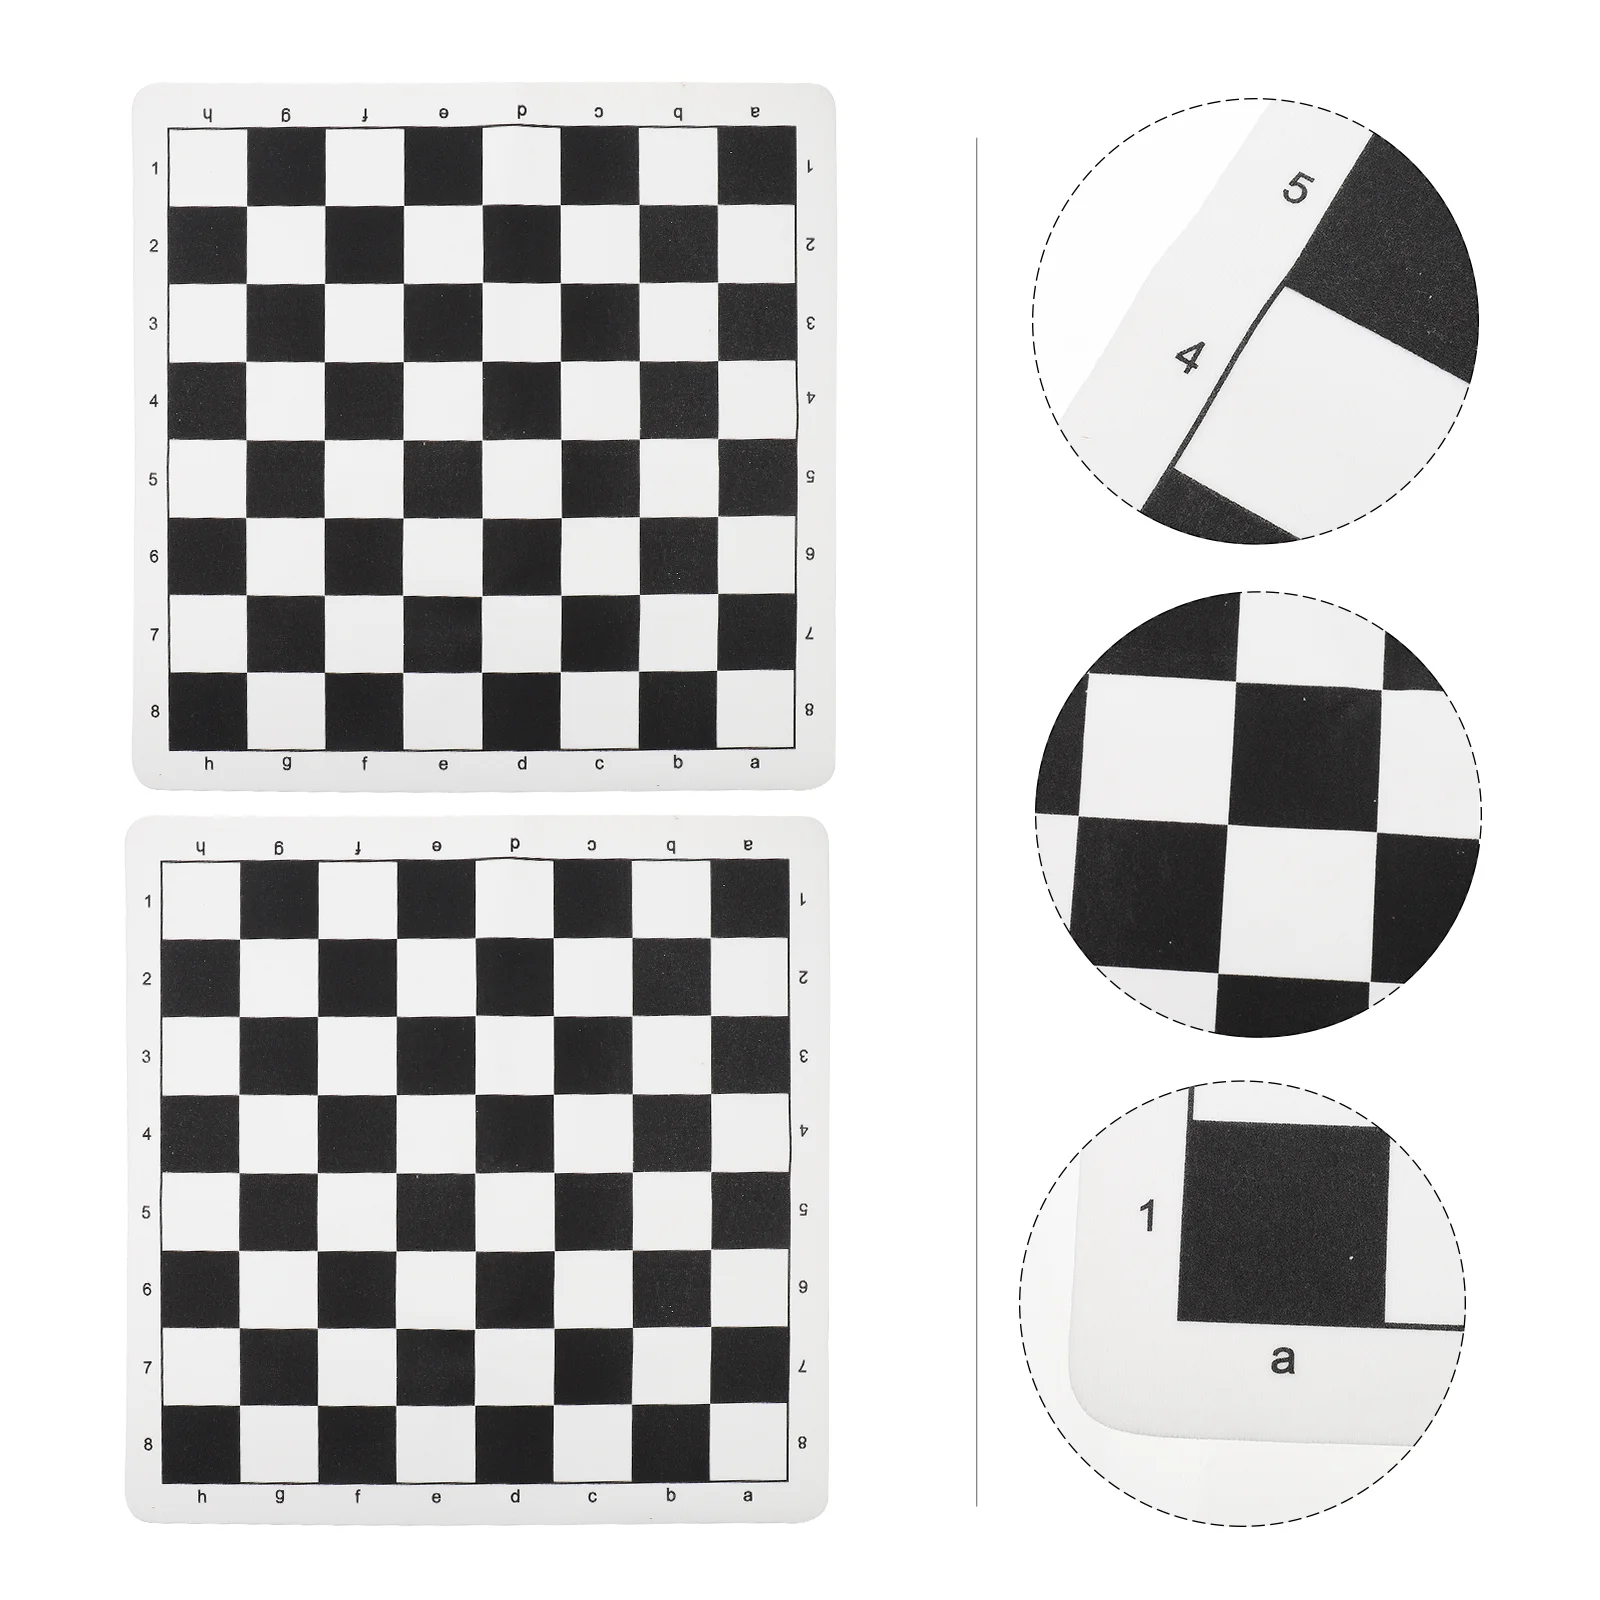 

Chess Board Mat Game Folding International Table Travel Rollprofessional Chinese Chessboard Portable Convenient Foldable Black